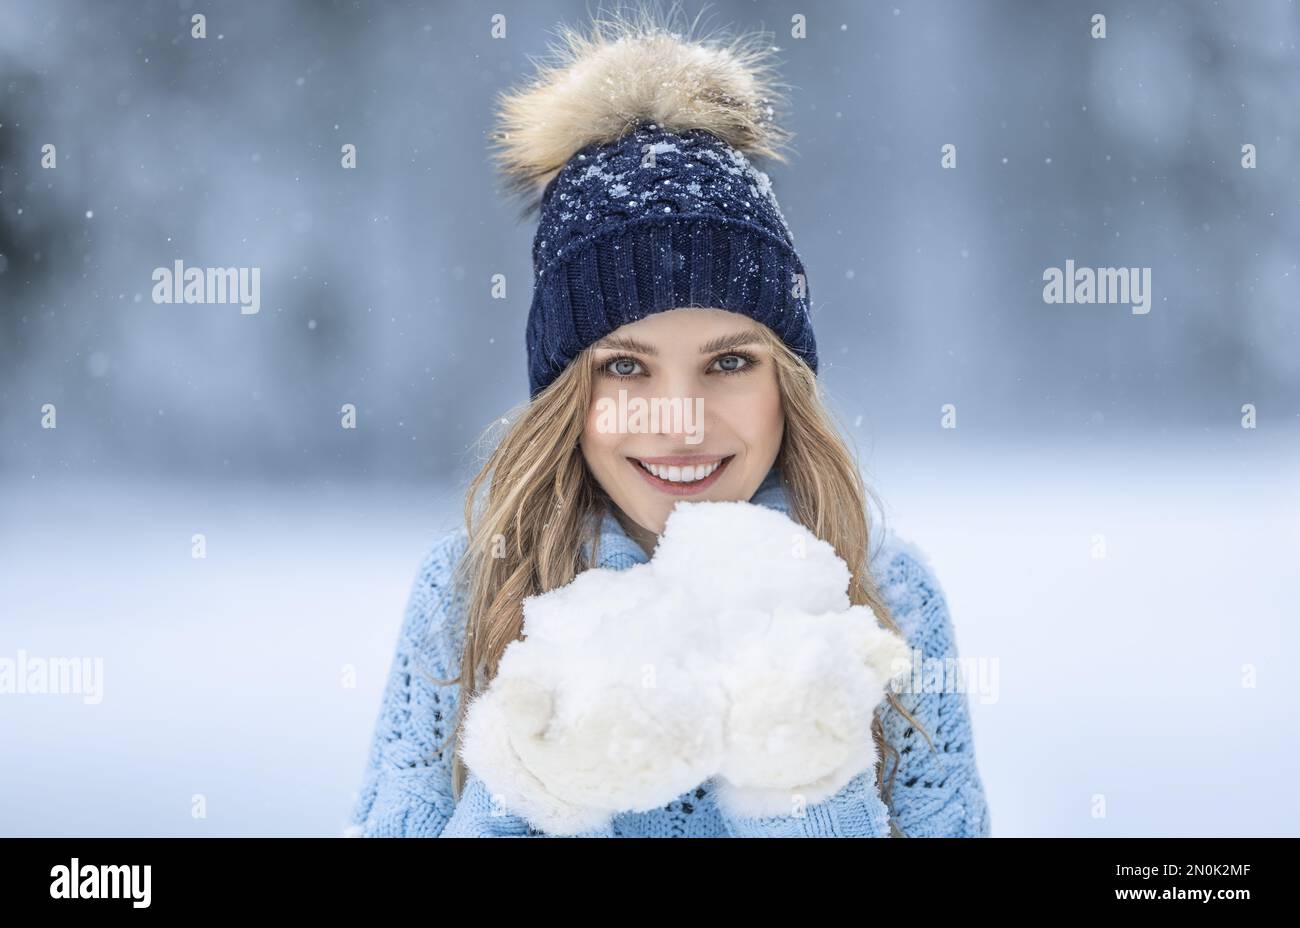 171,864 Cold Weather Clothes Royalty-Free Photos and Stock Images